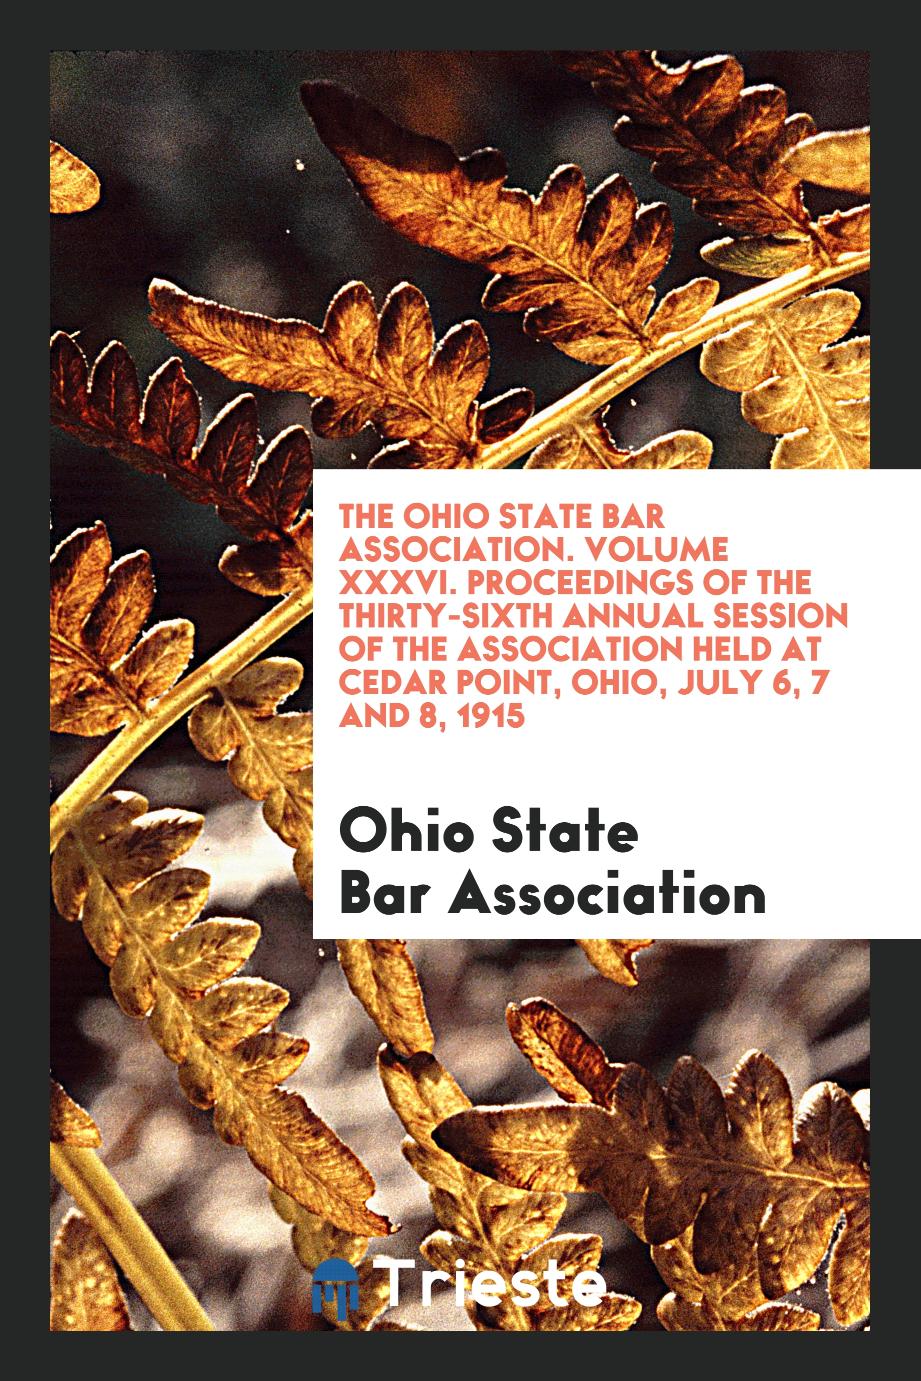 The Ohio State Bar Association. Volume XXXVI. Proceedings of the Thirty-Sixth Annual Session of the Association Held at Cedar Point, Ohio, July 6, 7 and 8, 1915